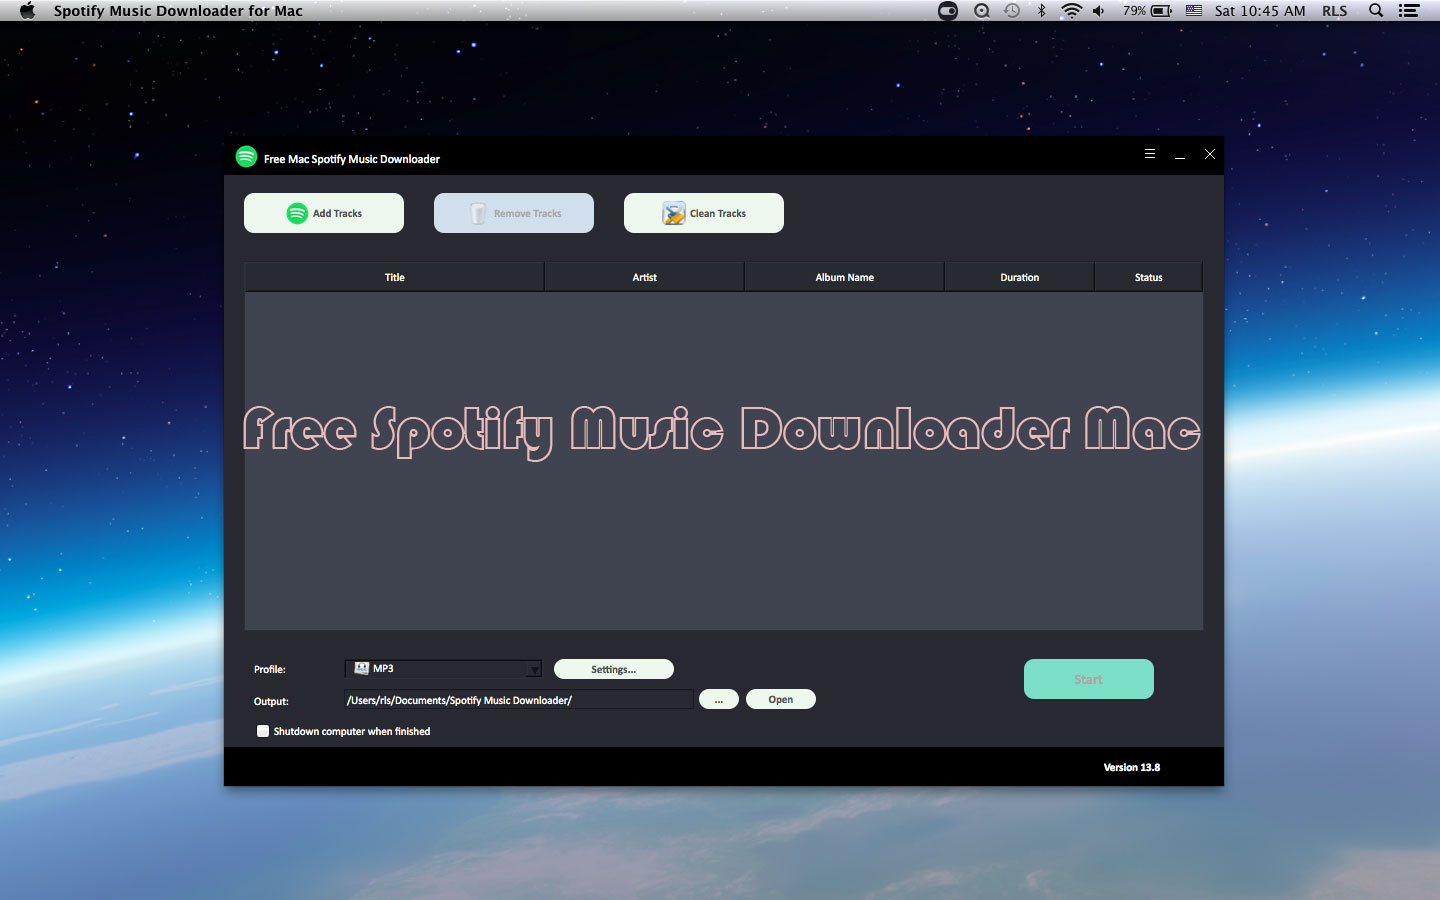 How to Download Spotify Music to Your Computer for Windows/Mac/Linux